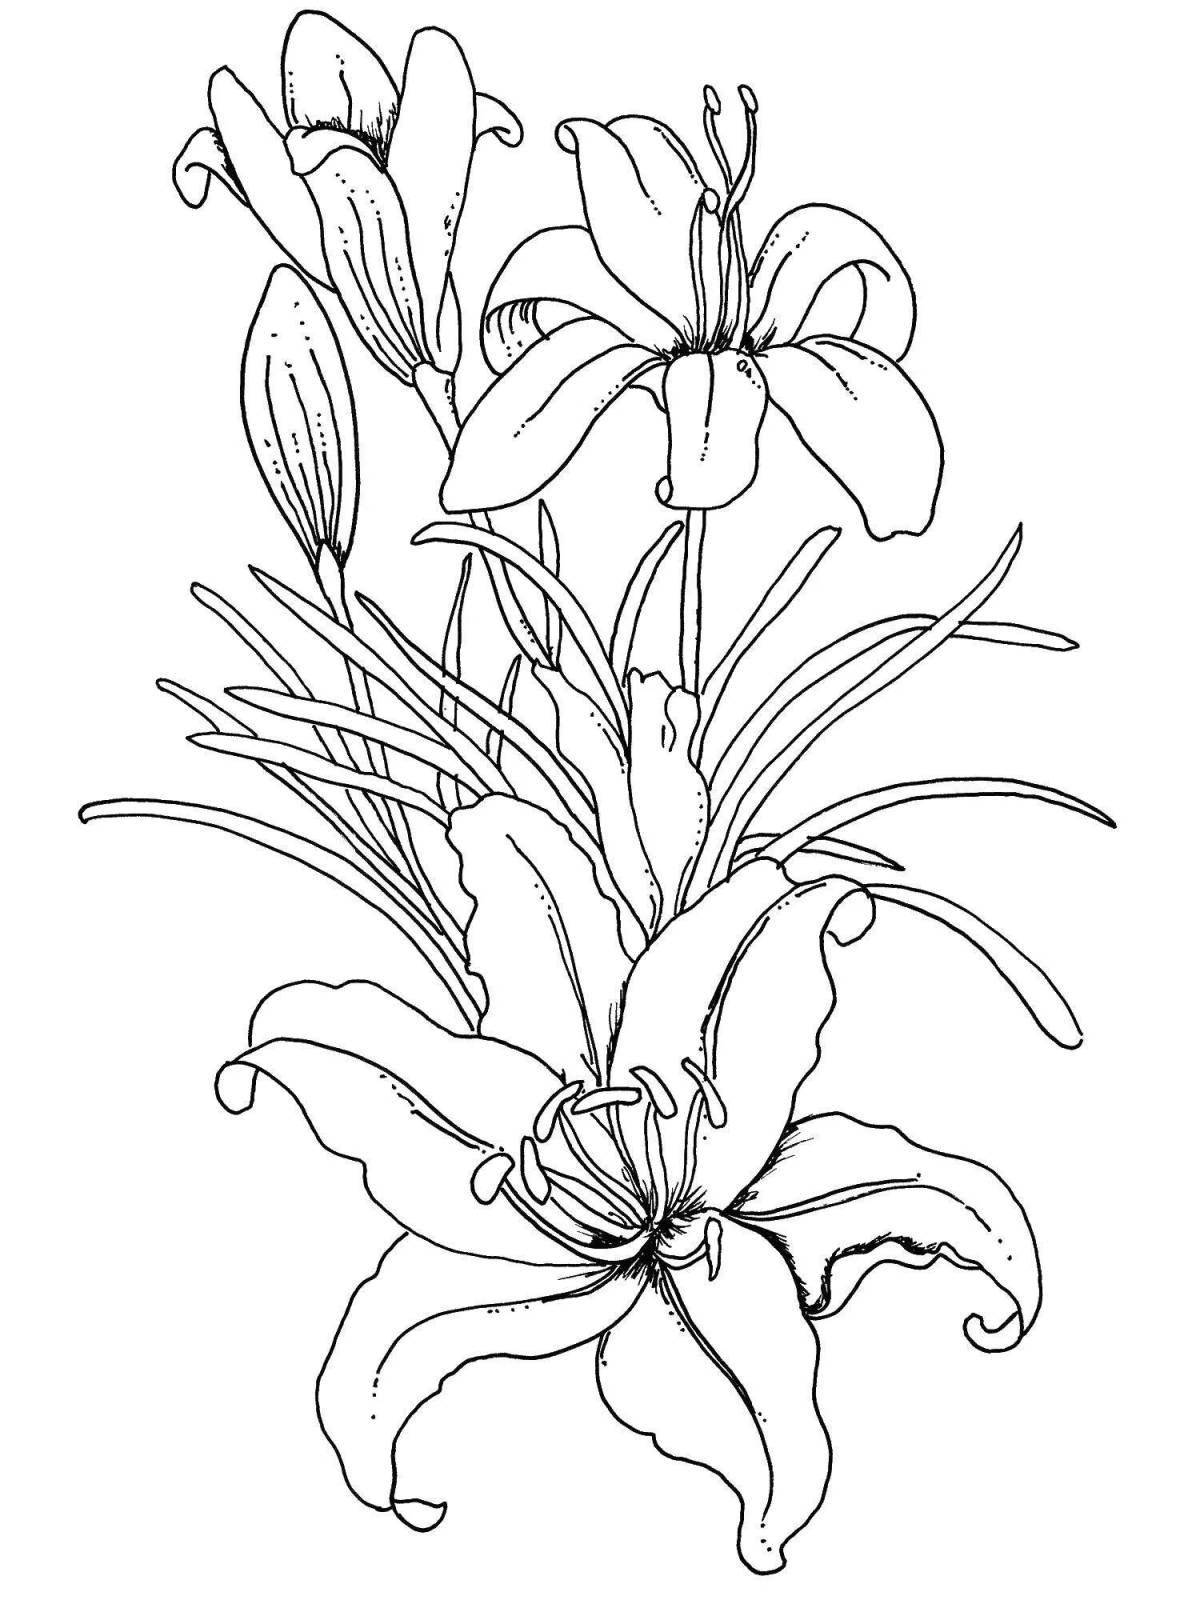 Coloring book gorgeous lily flower